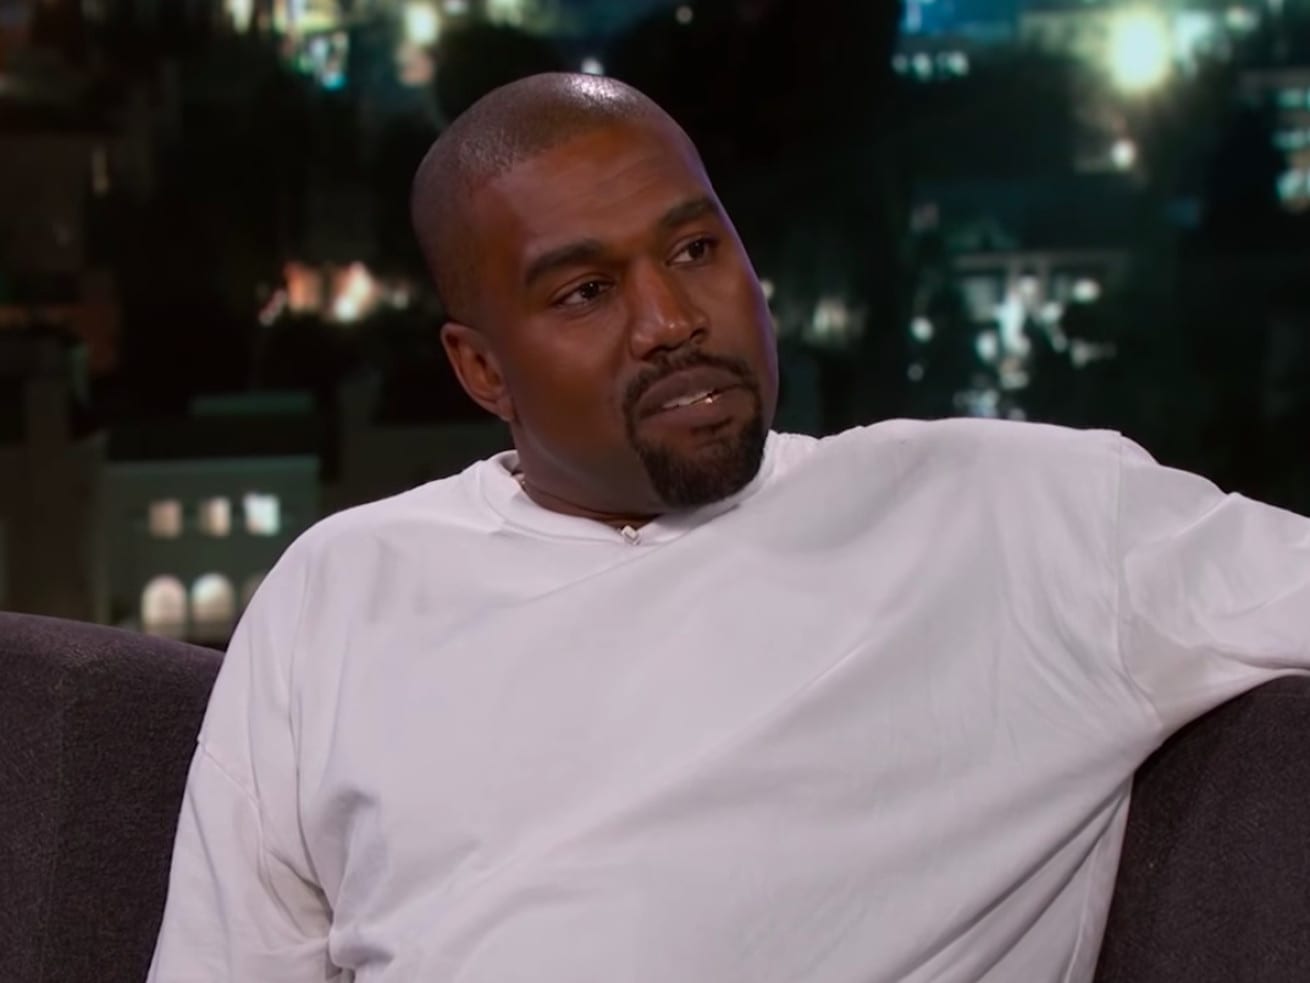 Watch: Kanye West defends his support of Donald Trump to Jimmy Kimmel